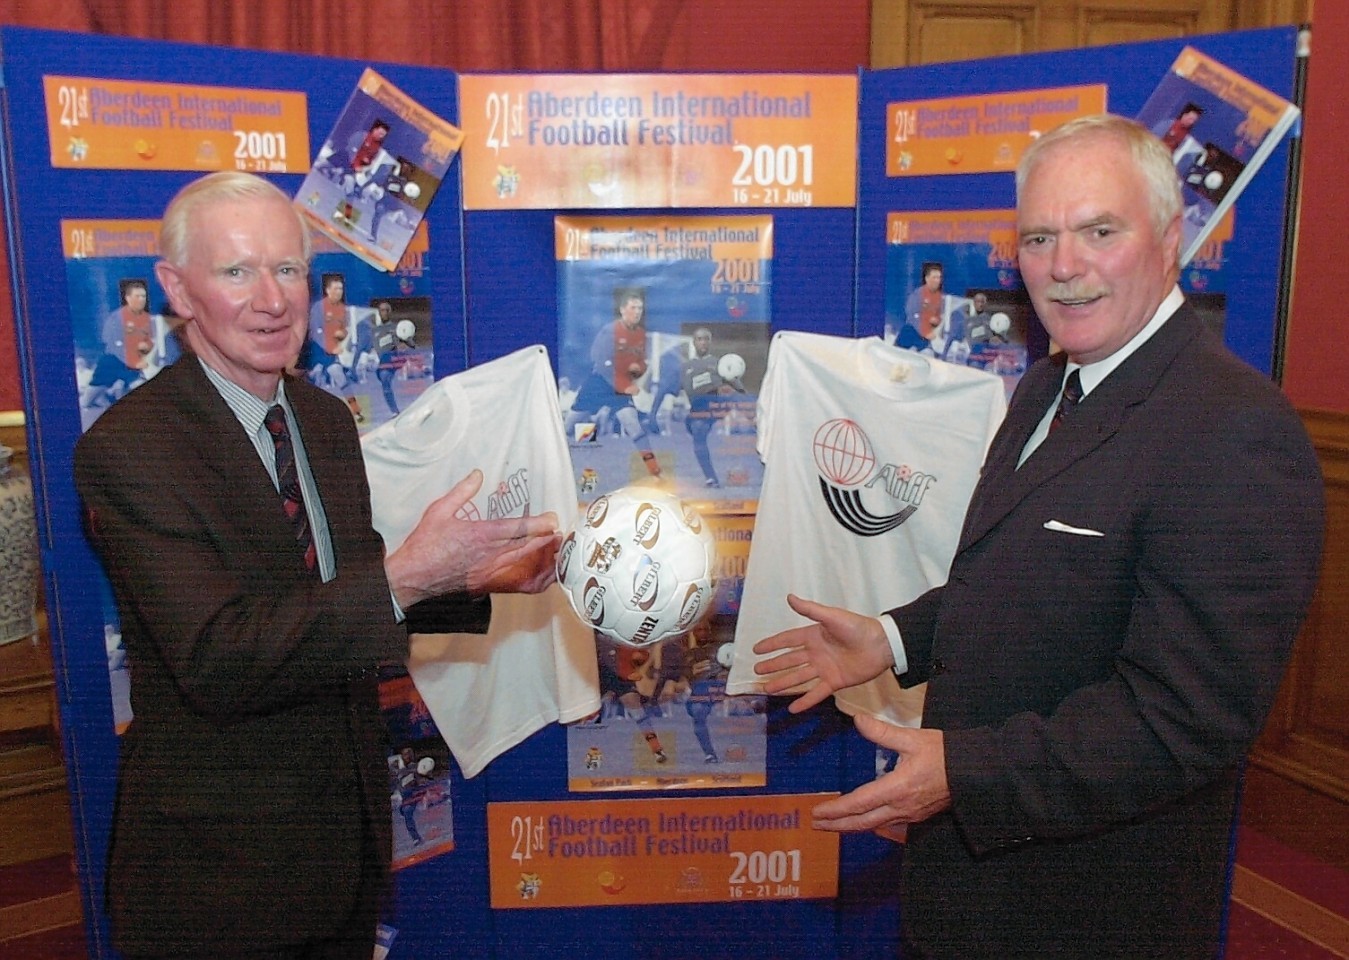 Andrew Armstrong and Gordon Naismith open the 21st Aberdeen International Football Festival